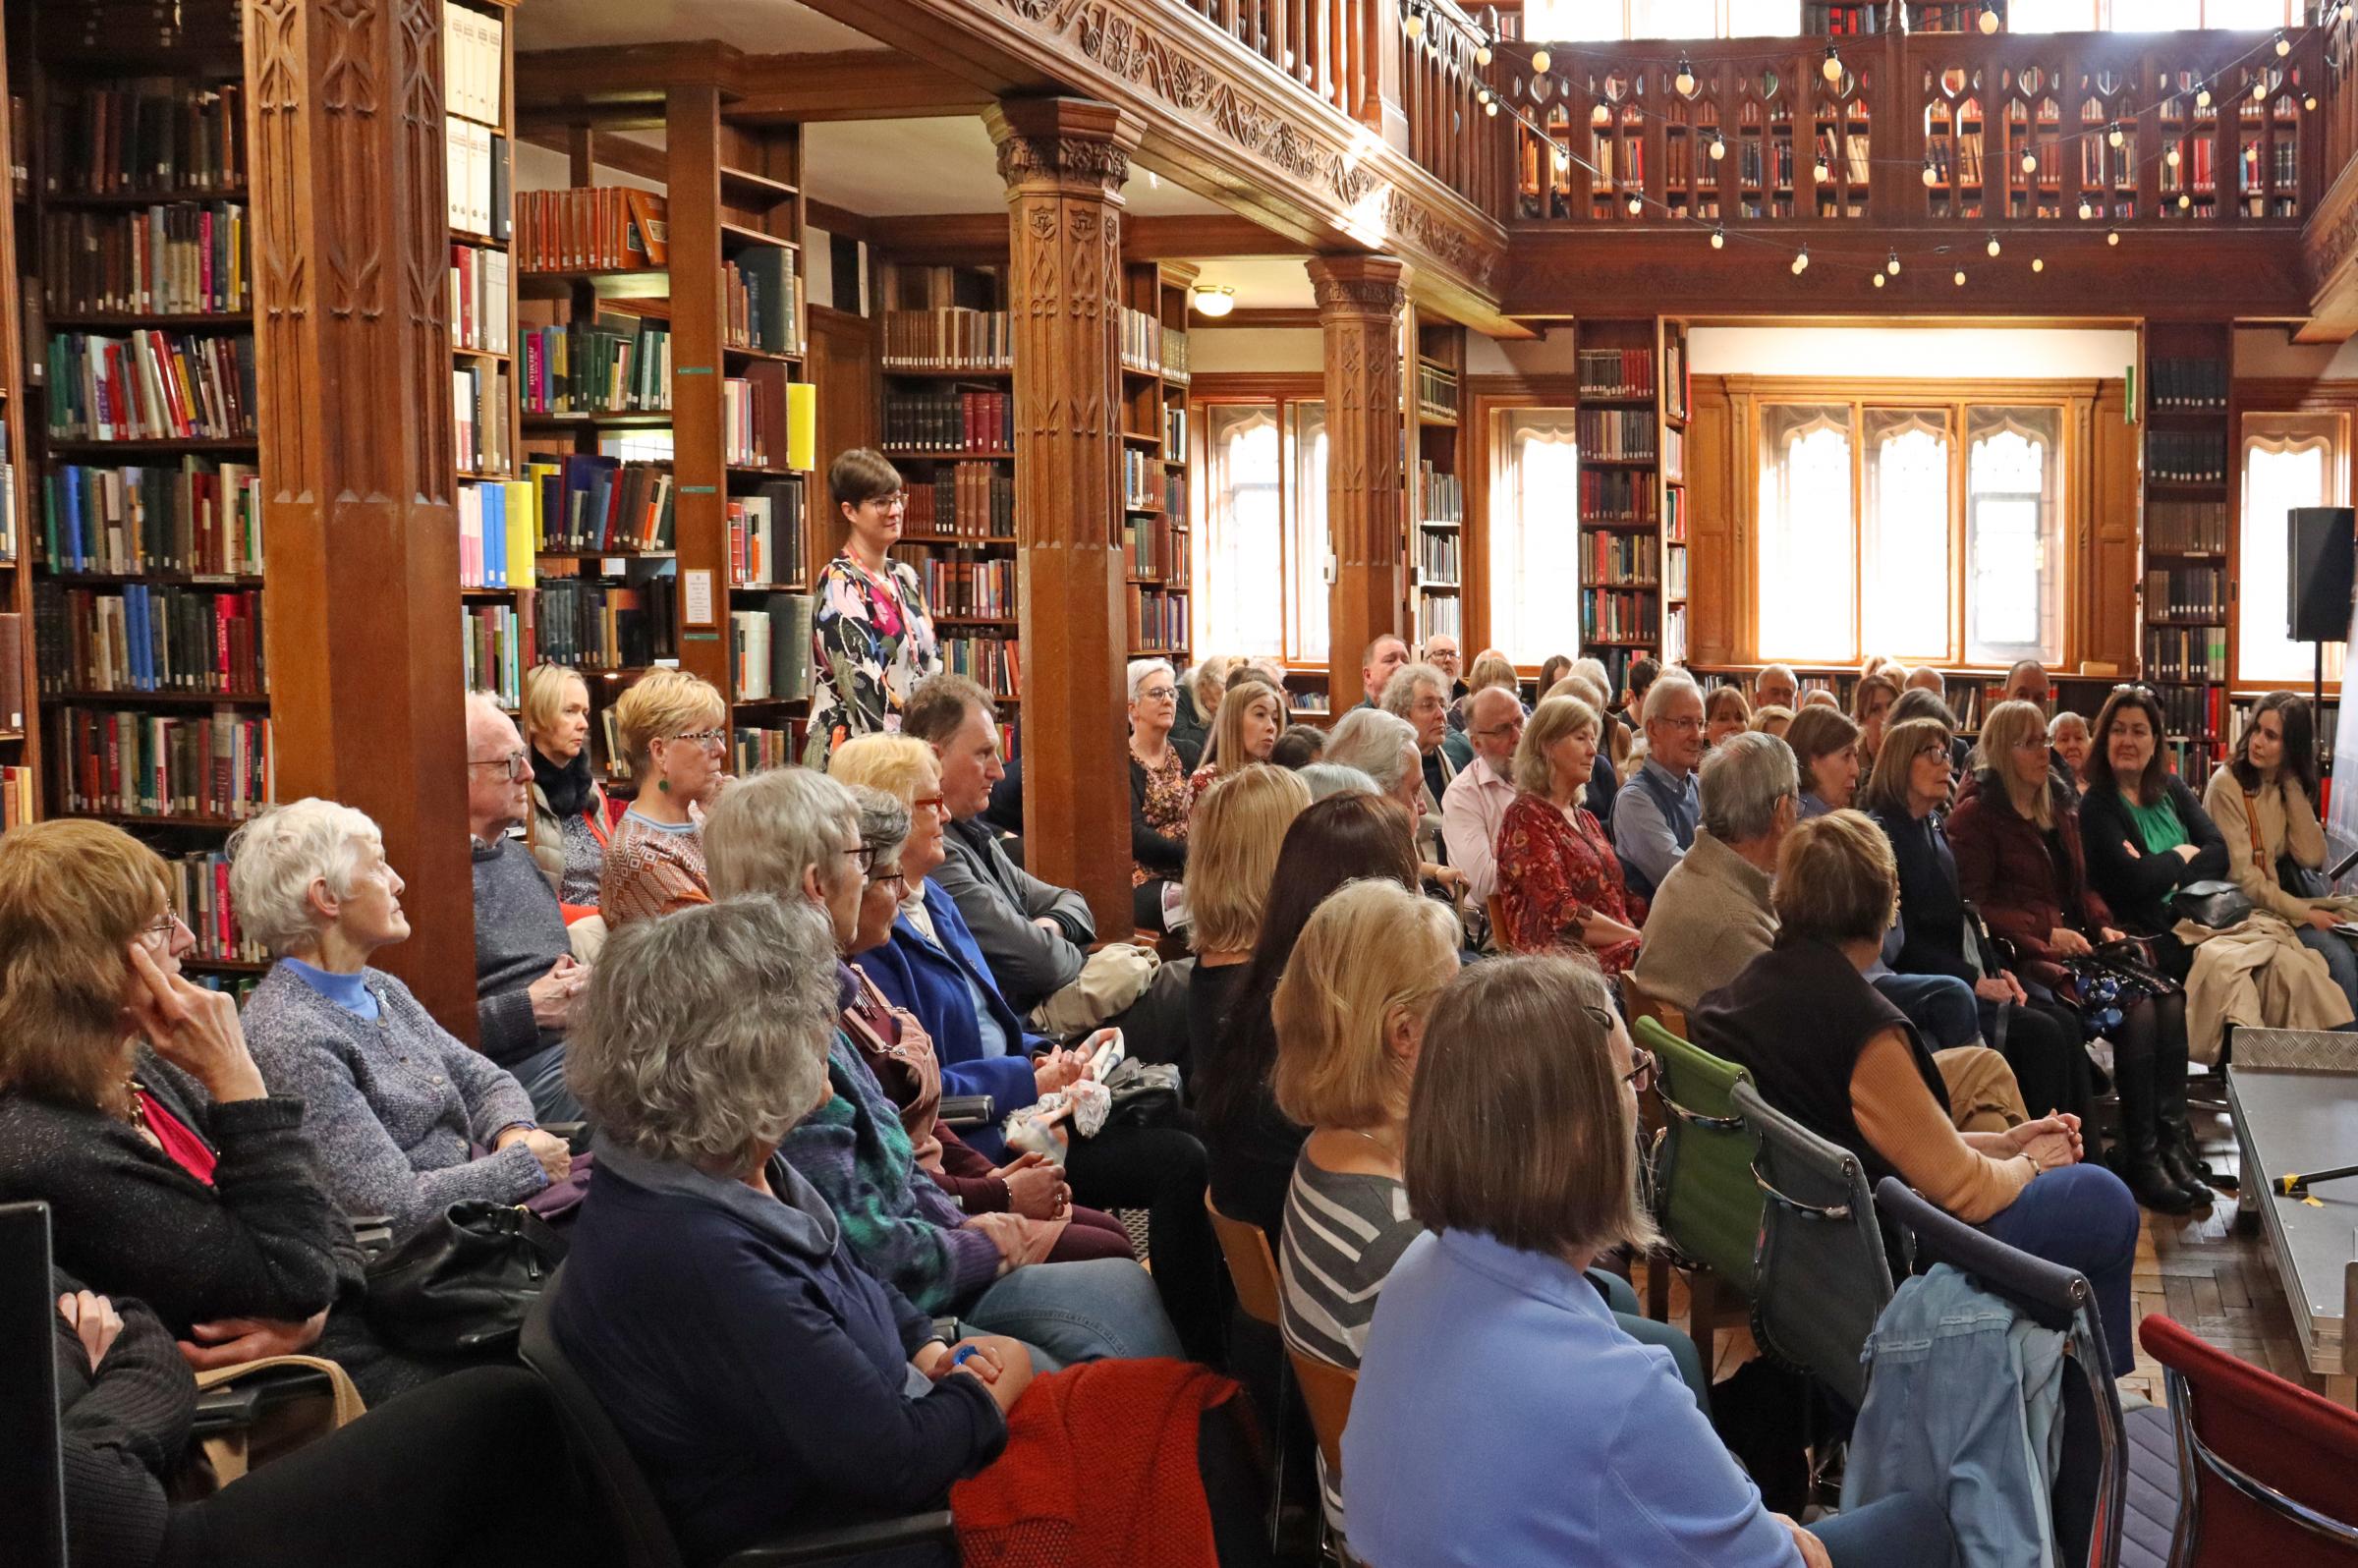 The audience at Gladstones Library. Photo: Jace Barry